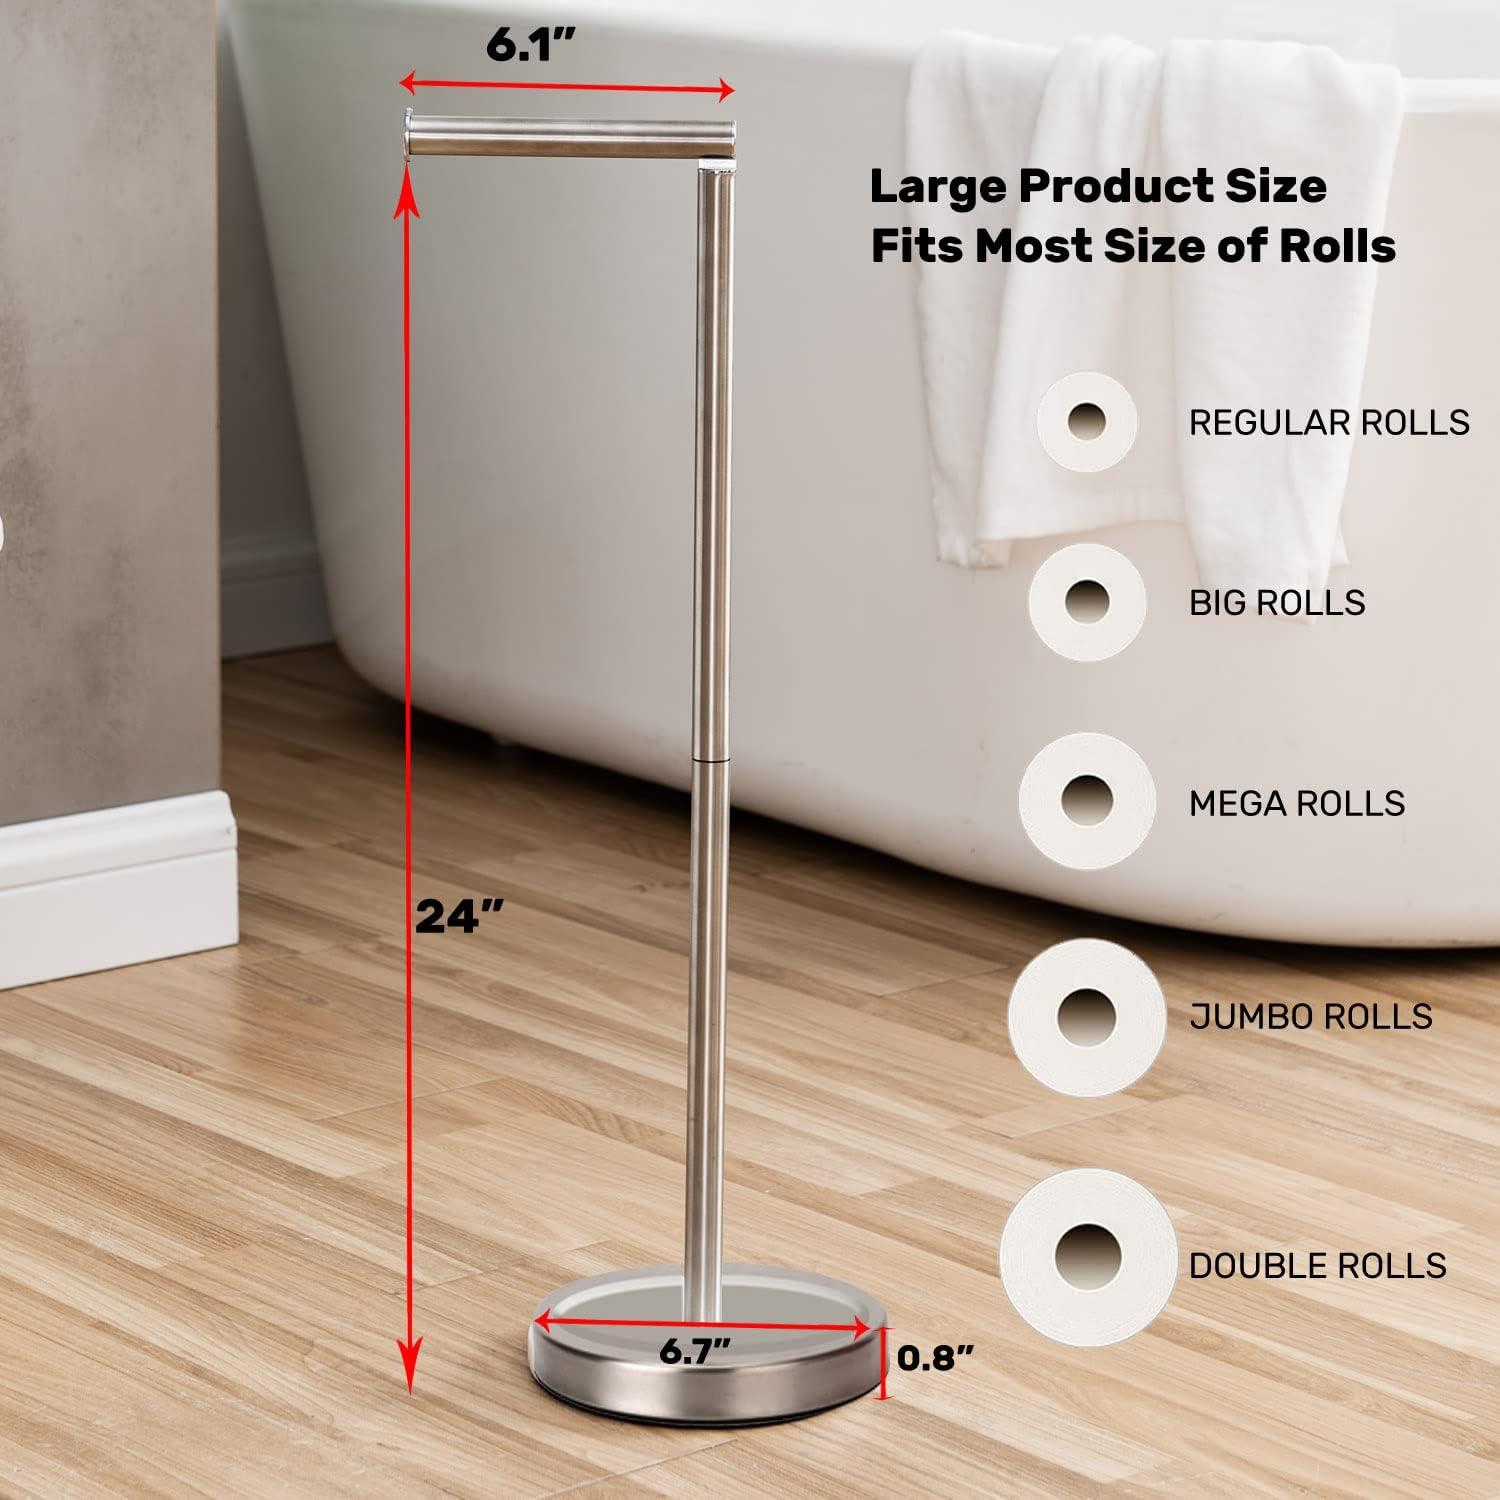 Freestanding Toilet Paper Holder Stand with Wood Base Bathroom